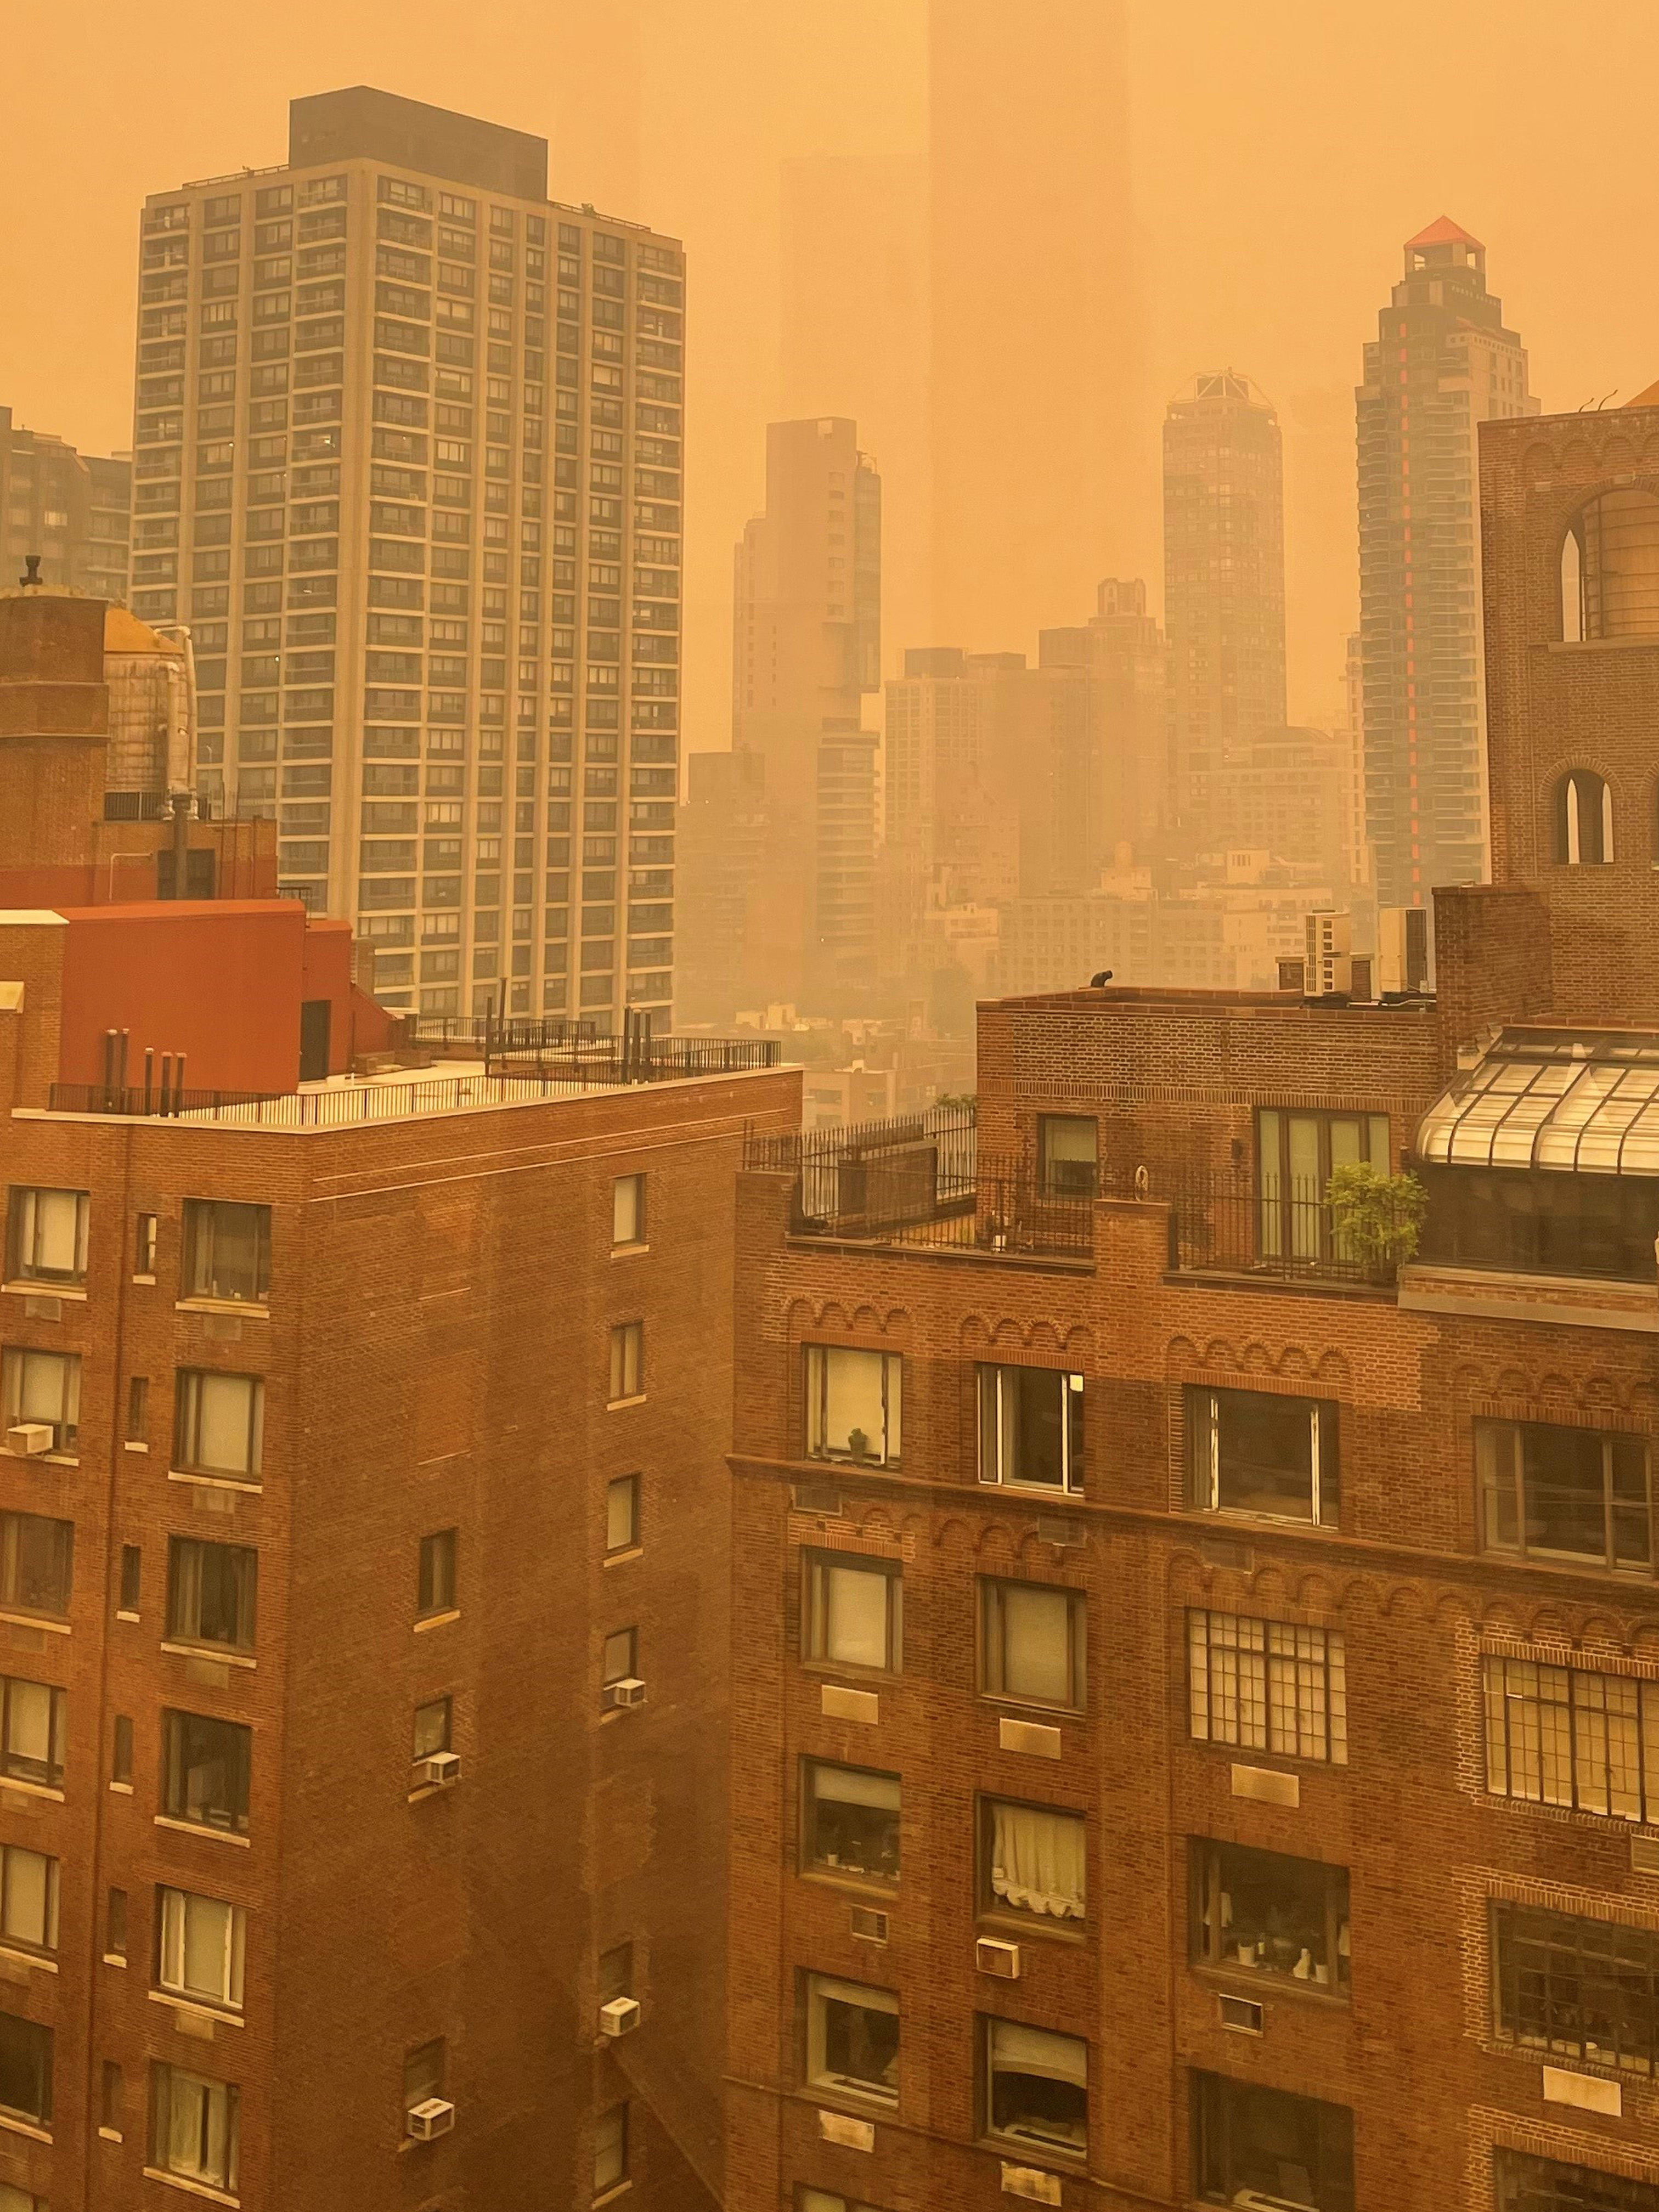 Wildfires affect on NYC